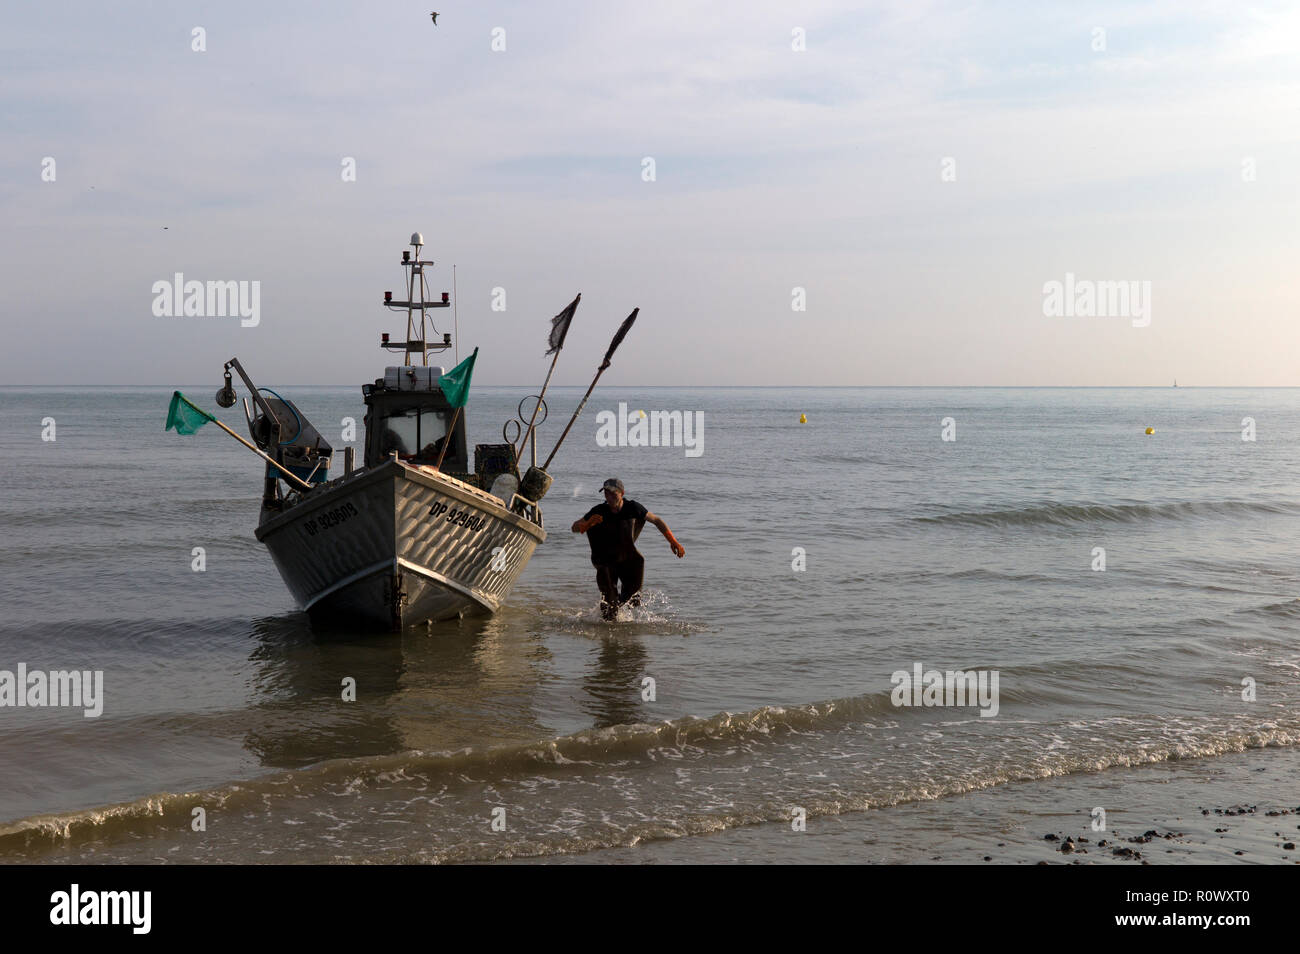 Fisherman running alongside his boat about to land on beach, Normandy,France Stock Photo